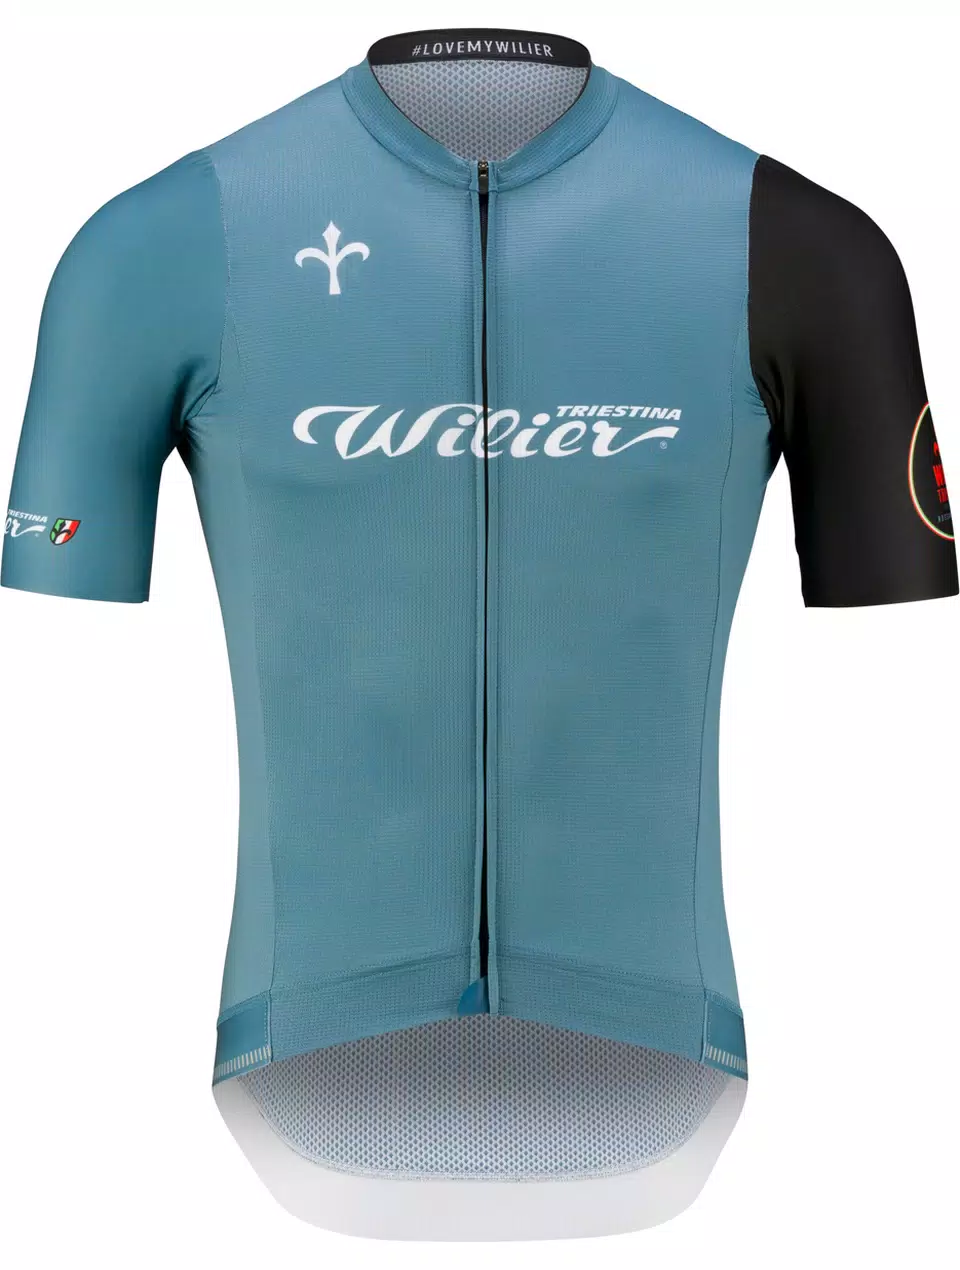 Maillot hombre Wilier Cycling Club azul